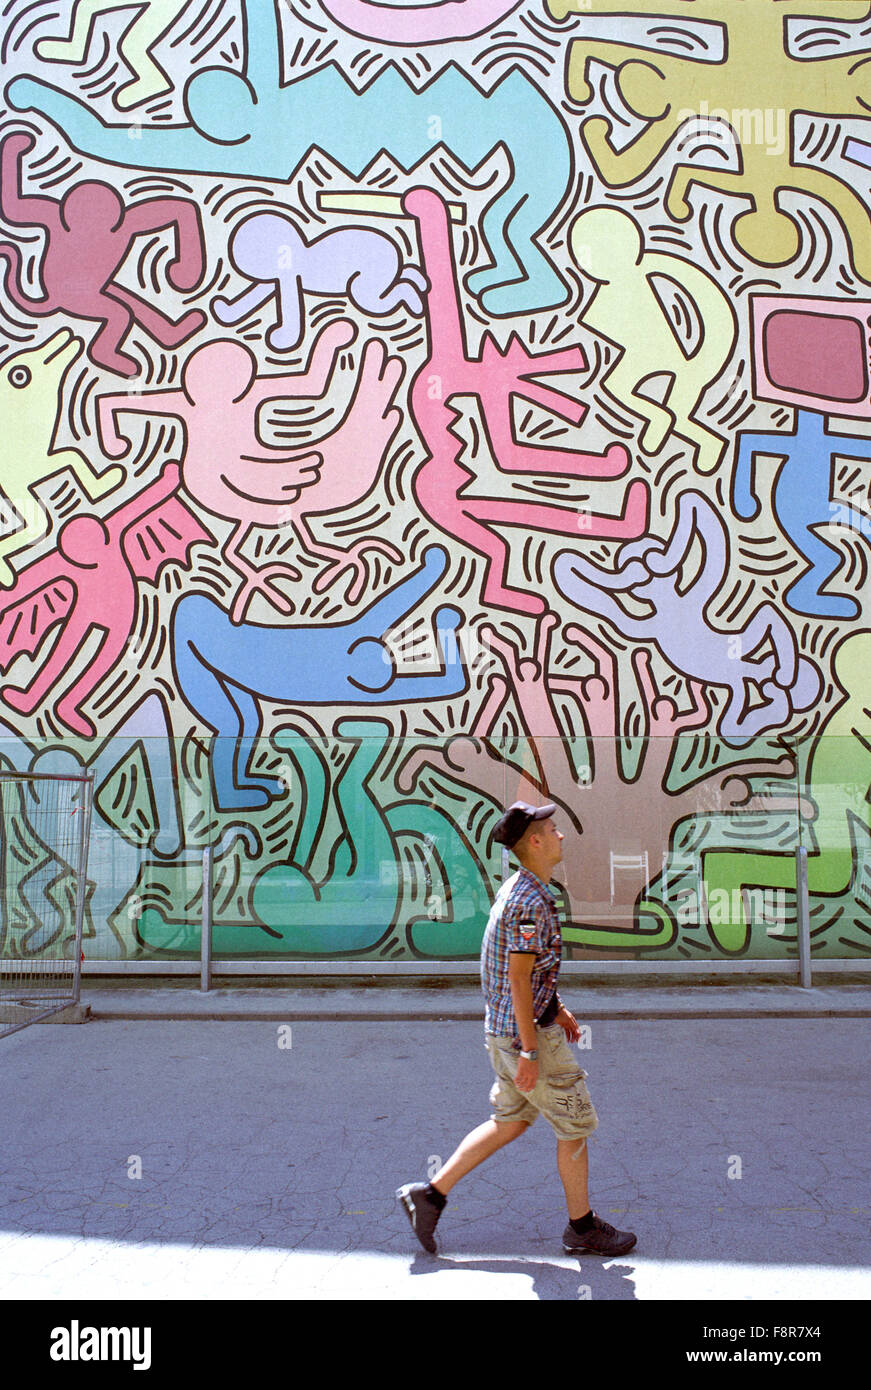 Italie, Toscane, Pise, Keith Haring Wall Painting Tuttomondo depuis 1989 Banque D'Images